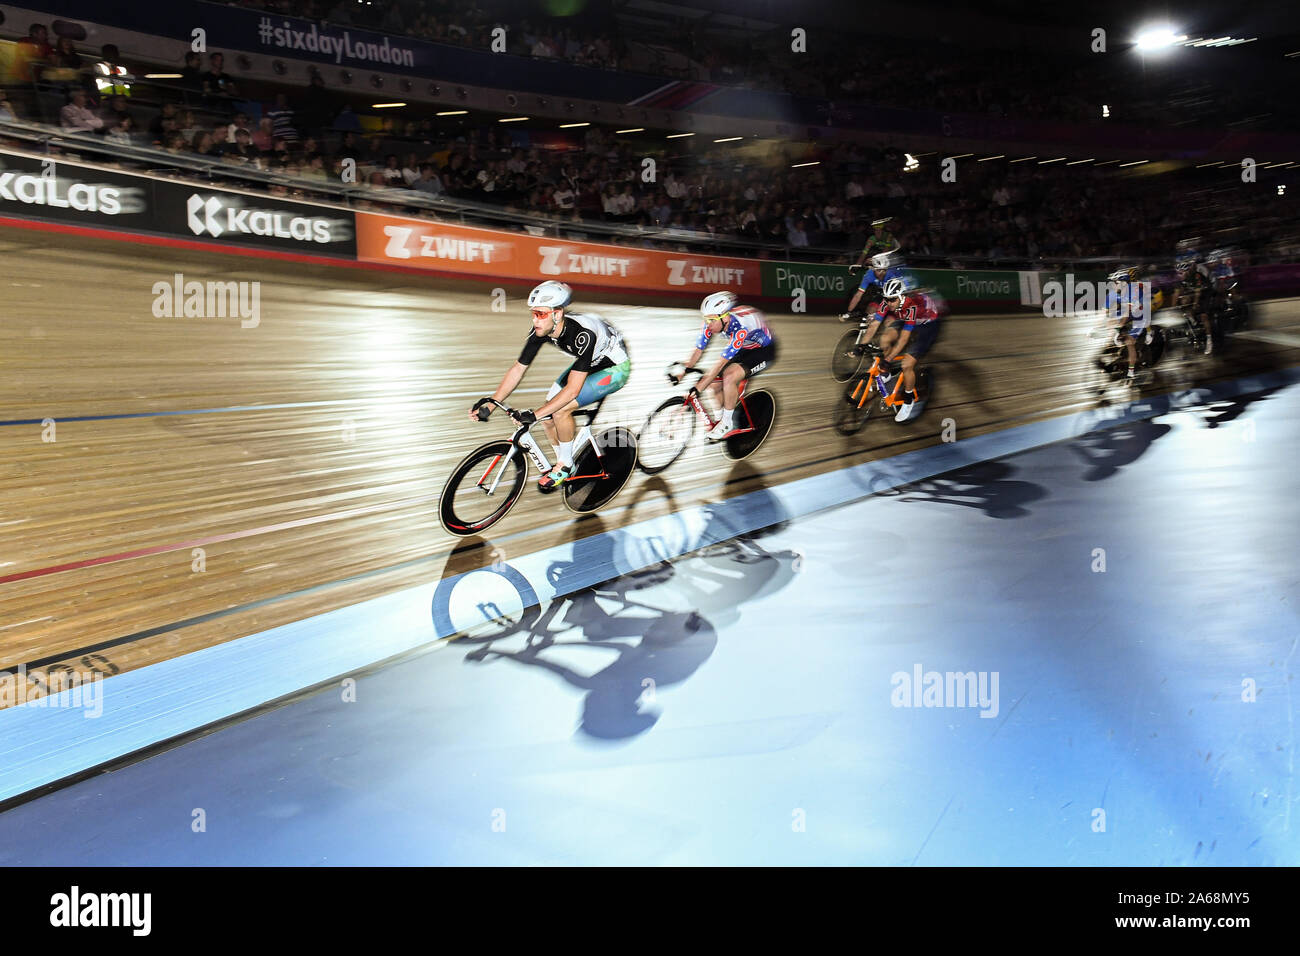 LONDON, UNITED KINGDOM. 24th Oct, 2019. Stephen Hall and Zack Gilmore (Australia) compete in Mens Elimination race during Day 3 of Six Day London 2019 at Lee Valley VeloPark on Thursday, October 24, 2019 in LONDON, UNITED KINGDOM. Credit: Taka G Wu/Alamy Live News Stock Photo